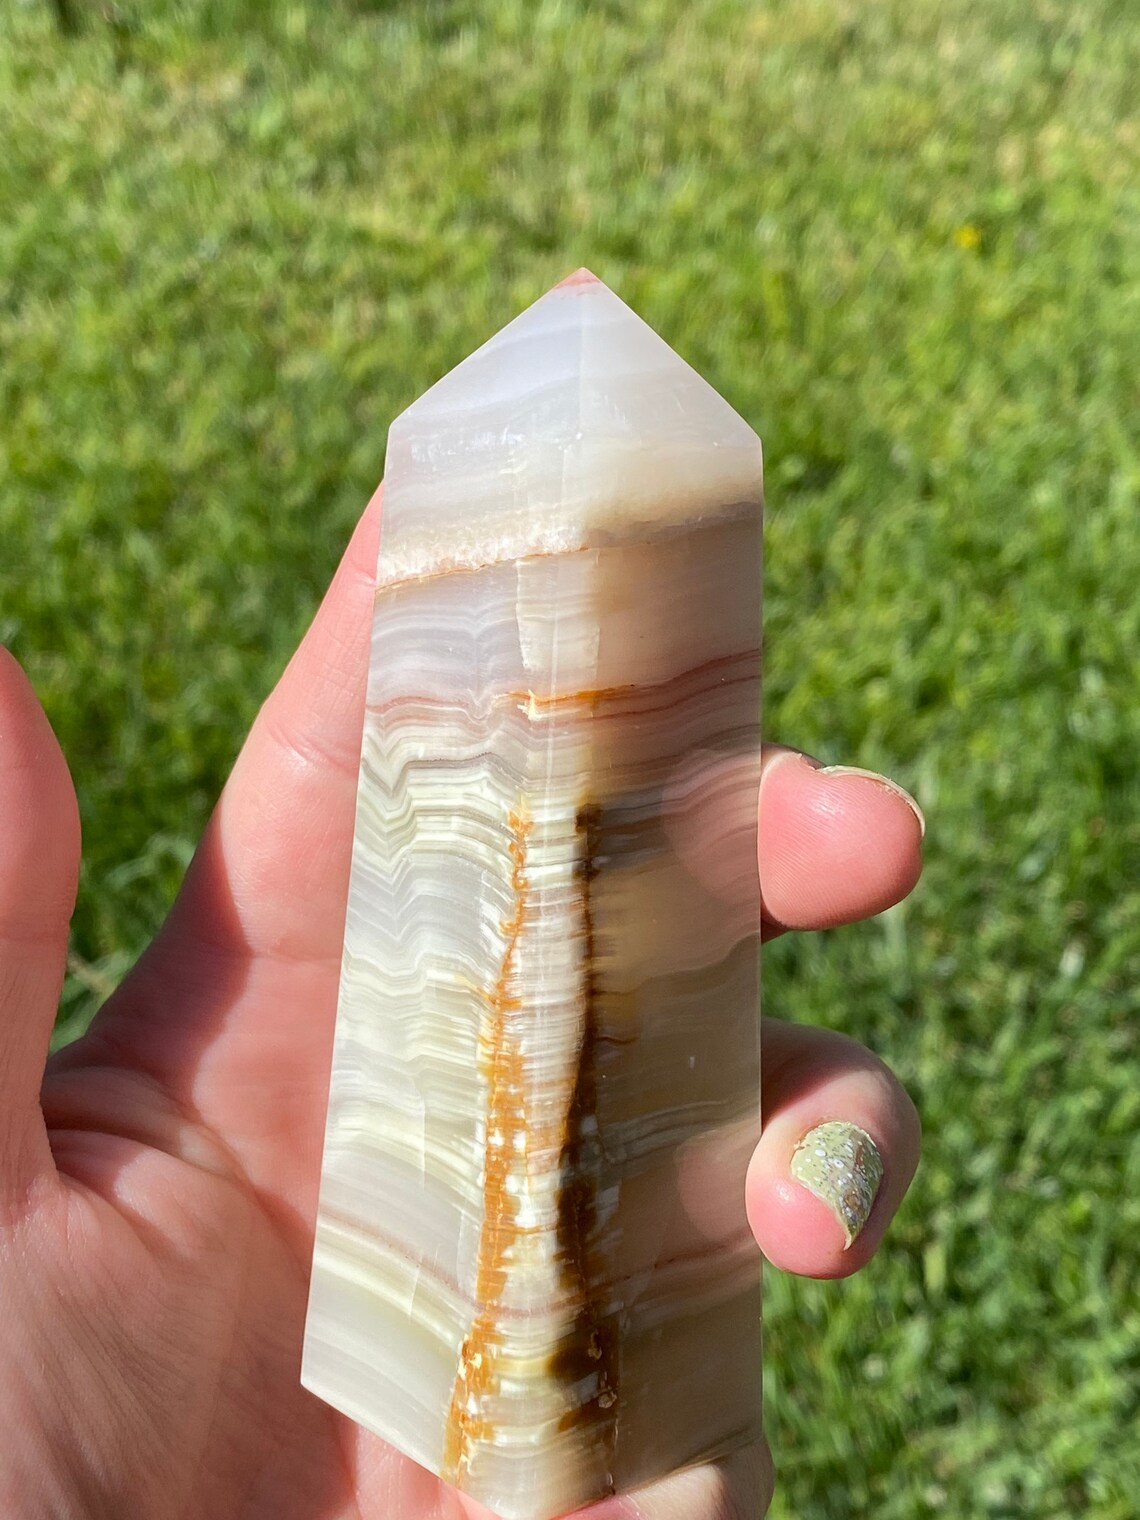 Pink Banded Calcite Tower Crystal Carved Tower Healing | Etsy